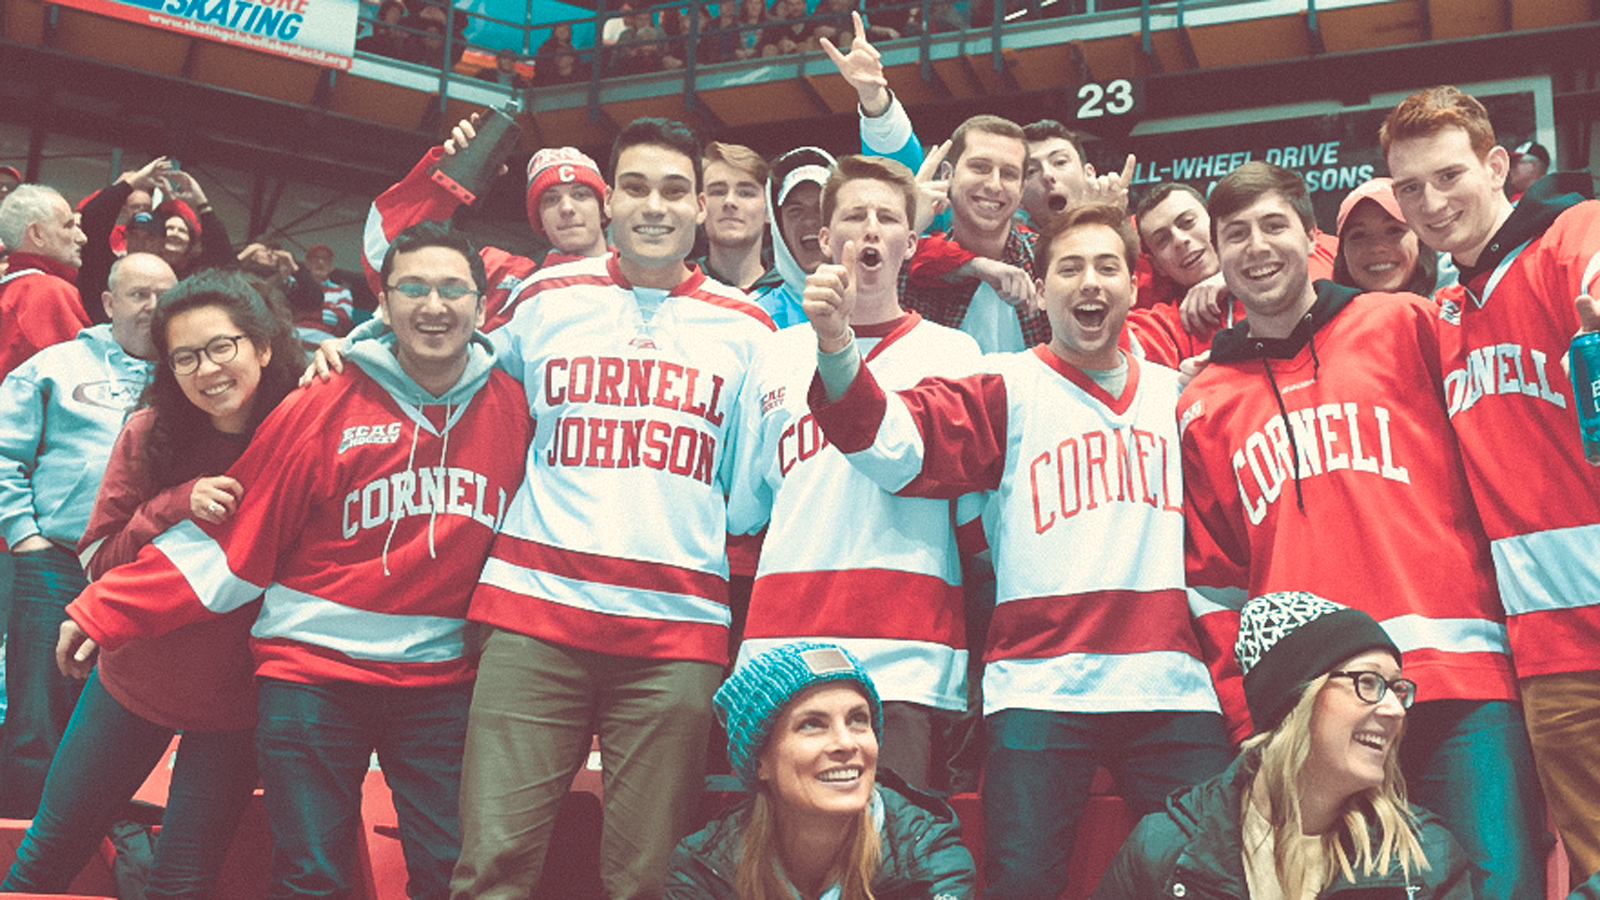 Cornell University hockey fans in the crowd for a game wearing red and white hockey jerseys.